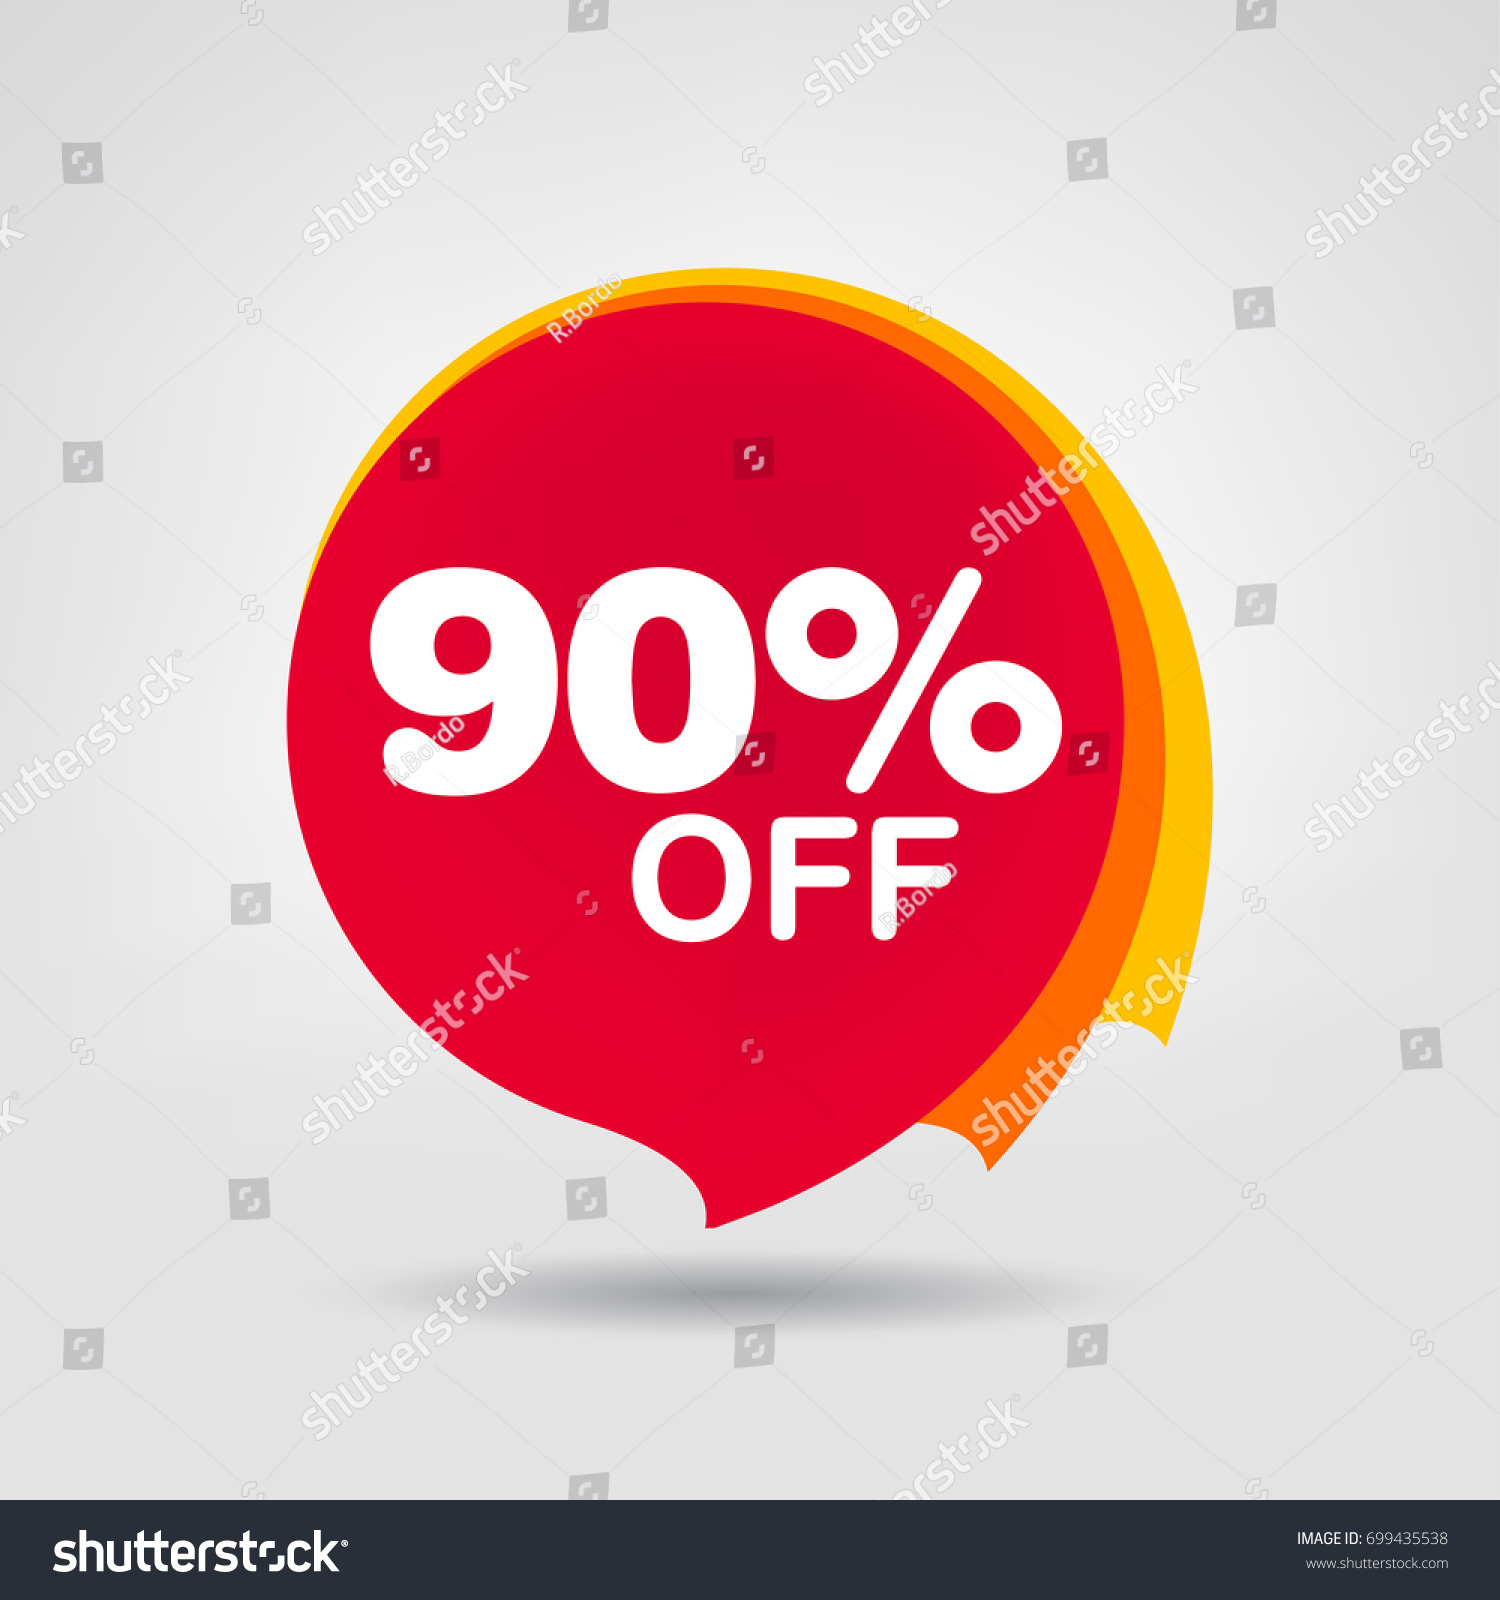 90% OFF Discount Sticker. Sale Red Tag Isolated Vector Illustration. Discount Offer Price Label, Vector Price Discount Symbol. #699435538